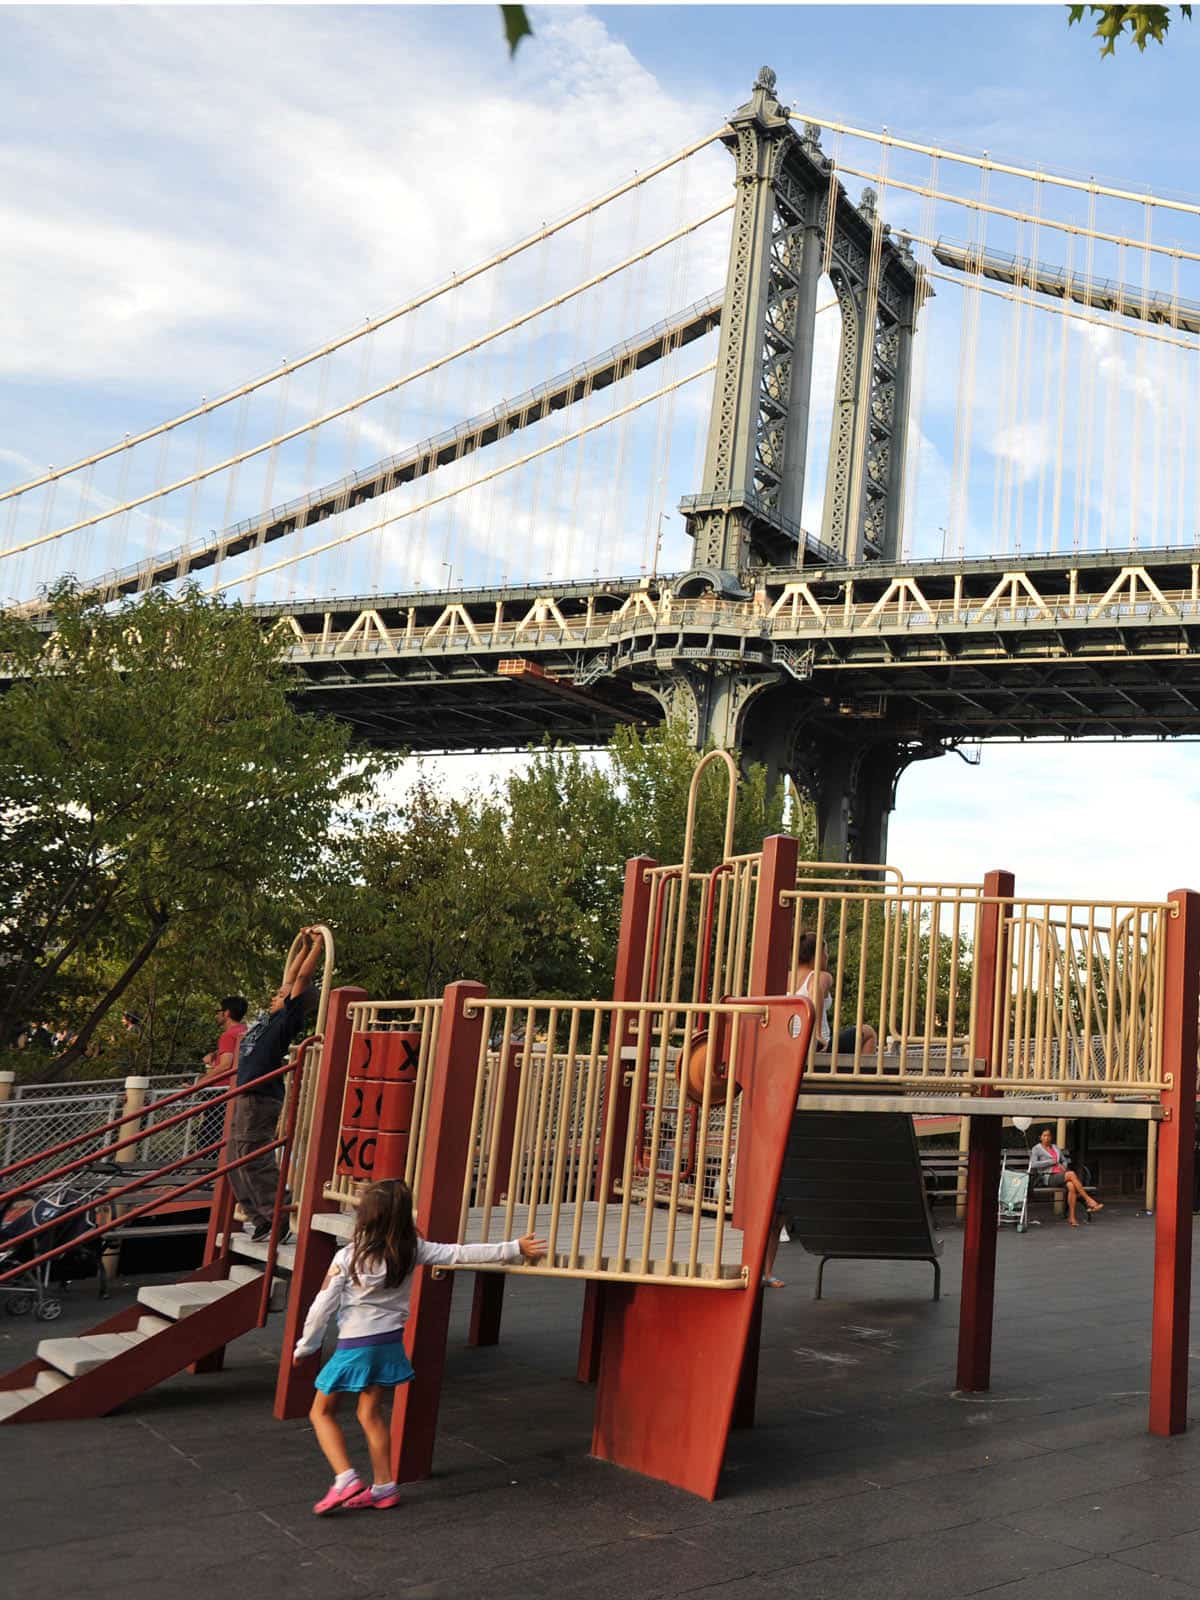 Children playing on a playground structure on a cloudy day. The Manhattan Bridge is seen overhead.